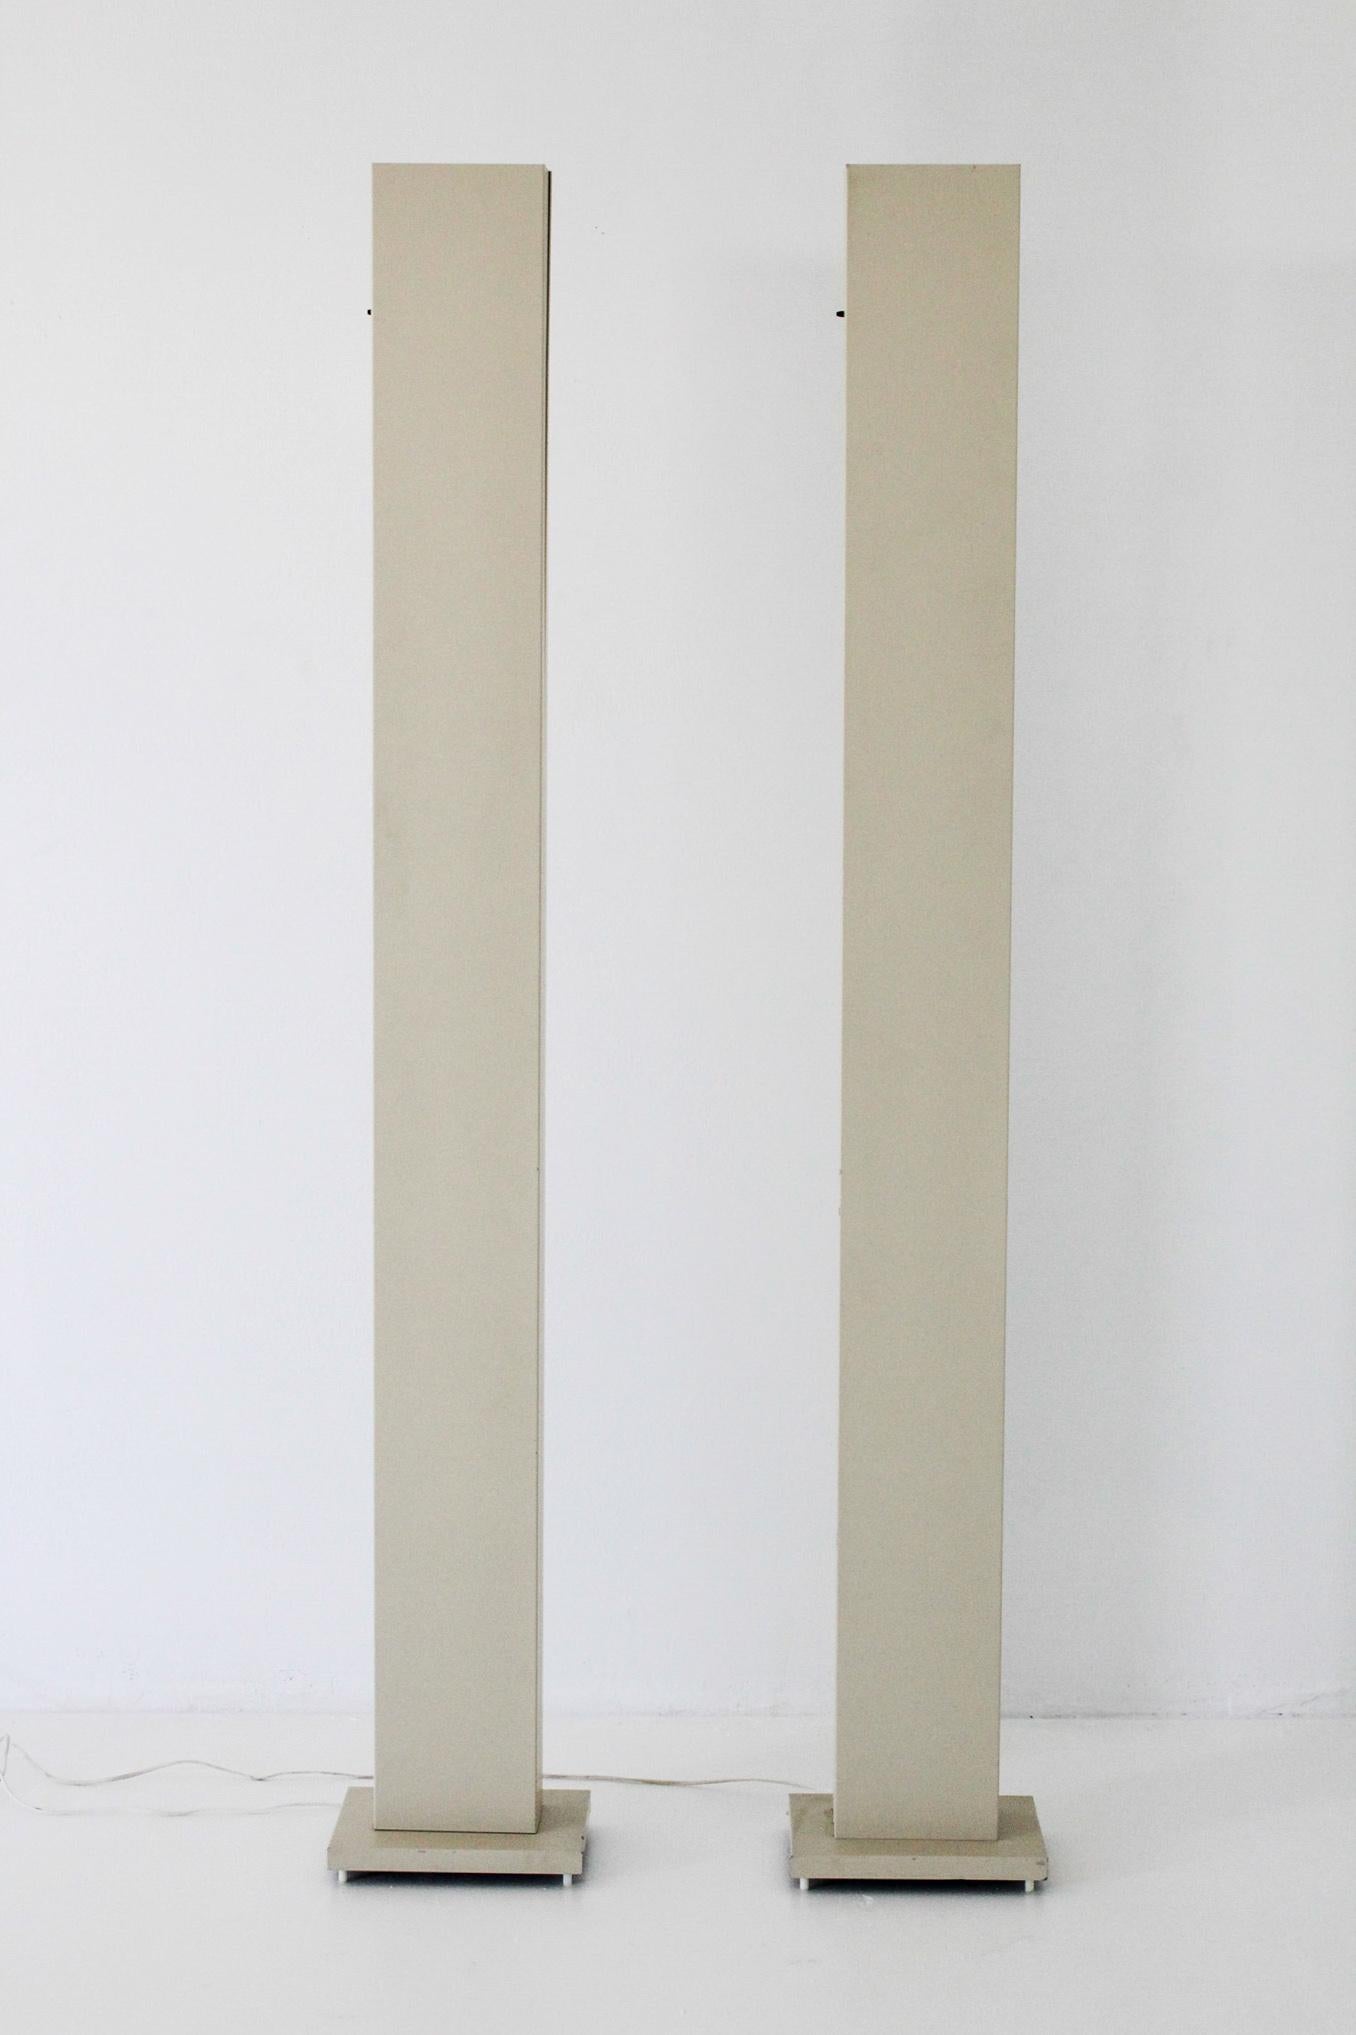 A Rare Pair of architectural form enamel monolith skyscraper halogen torchiere floor lamps by Casella Lighting San Francisco. Lamps are a rare finish as they are commonly brass or chrome finish. Lamps are in nice vintage condition with a few small